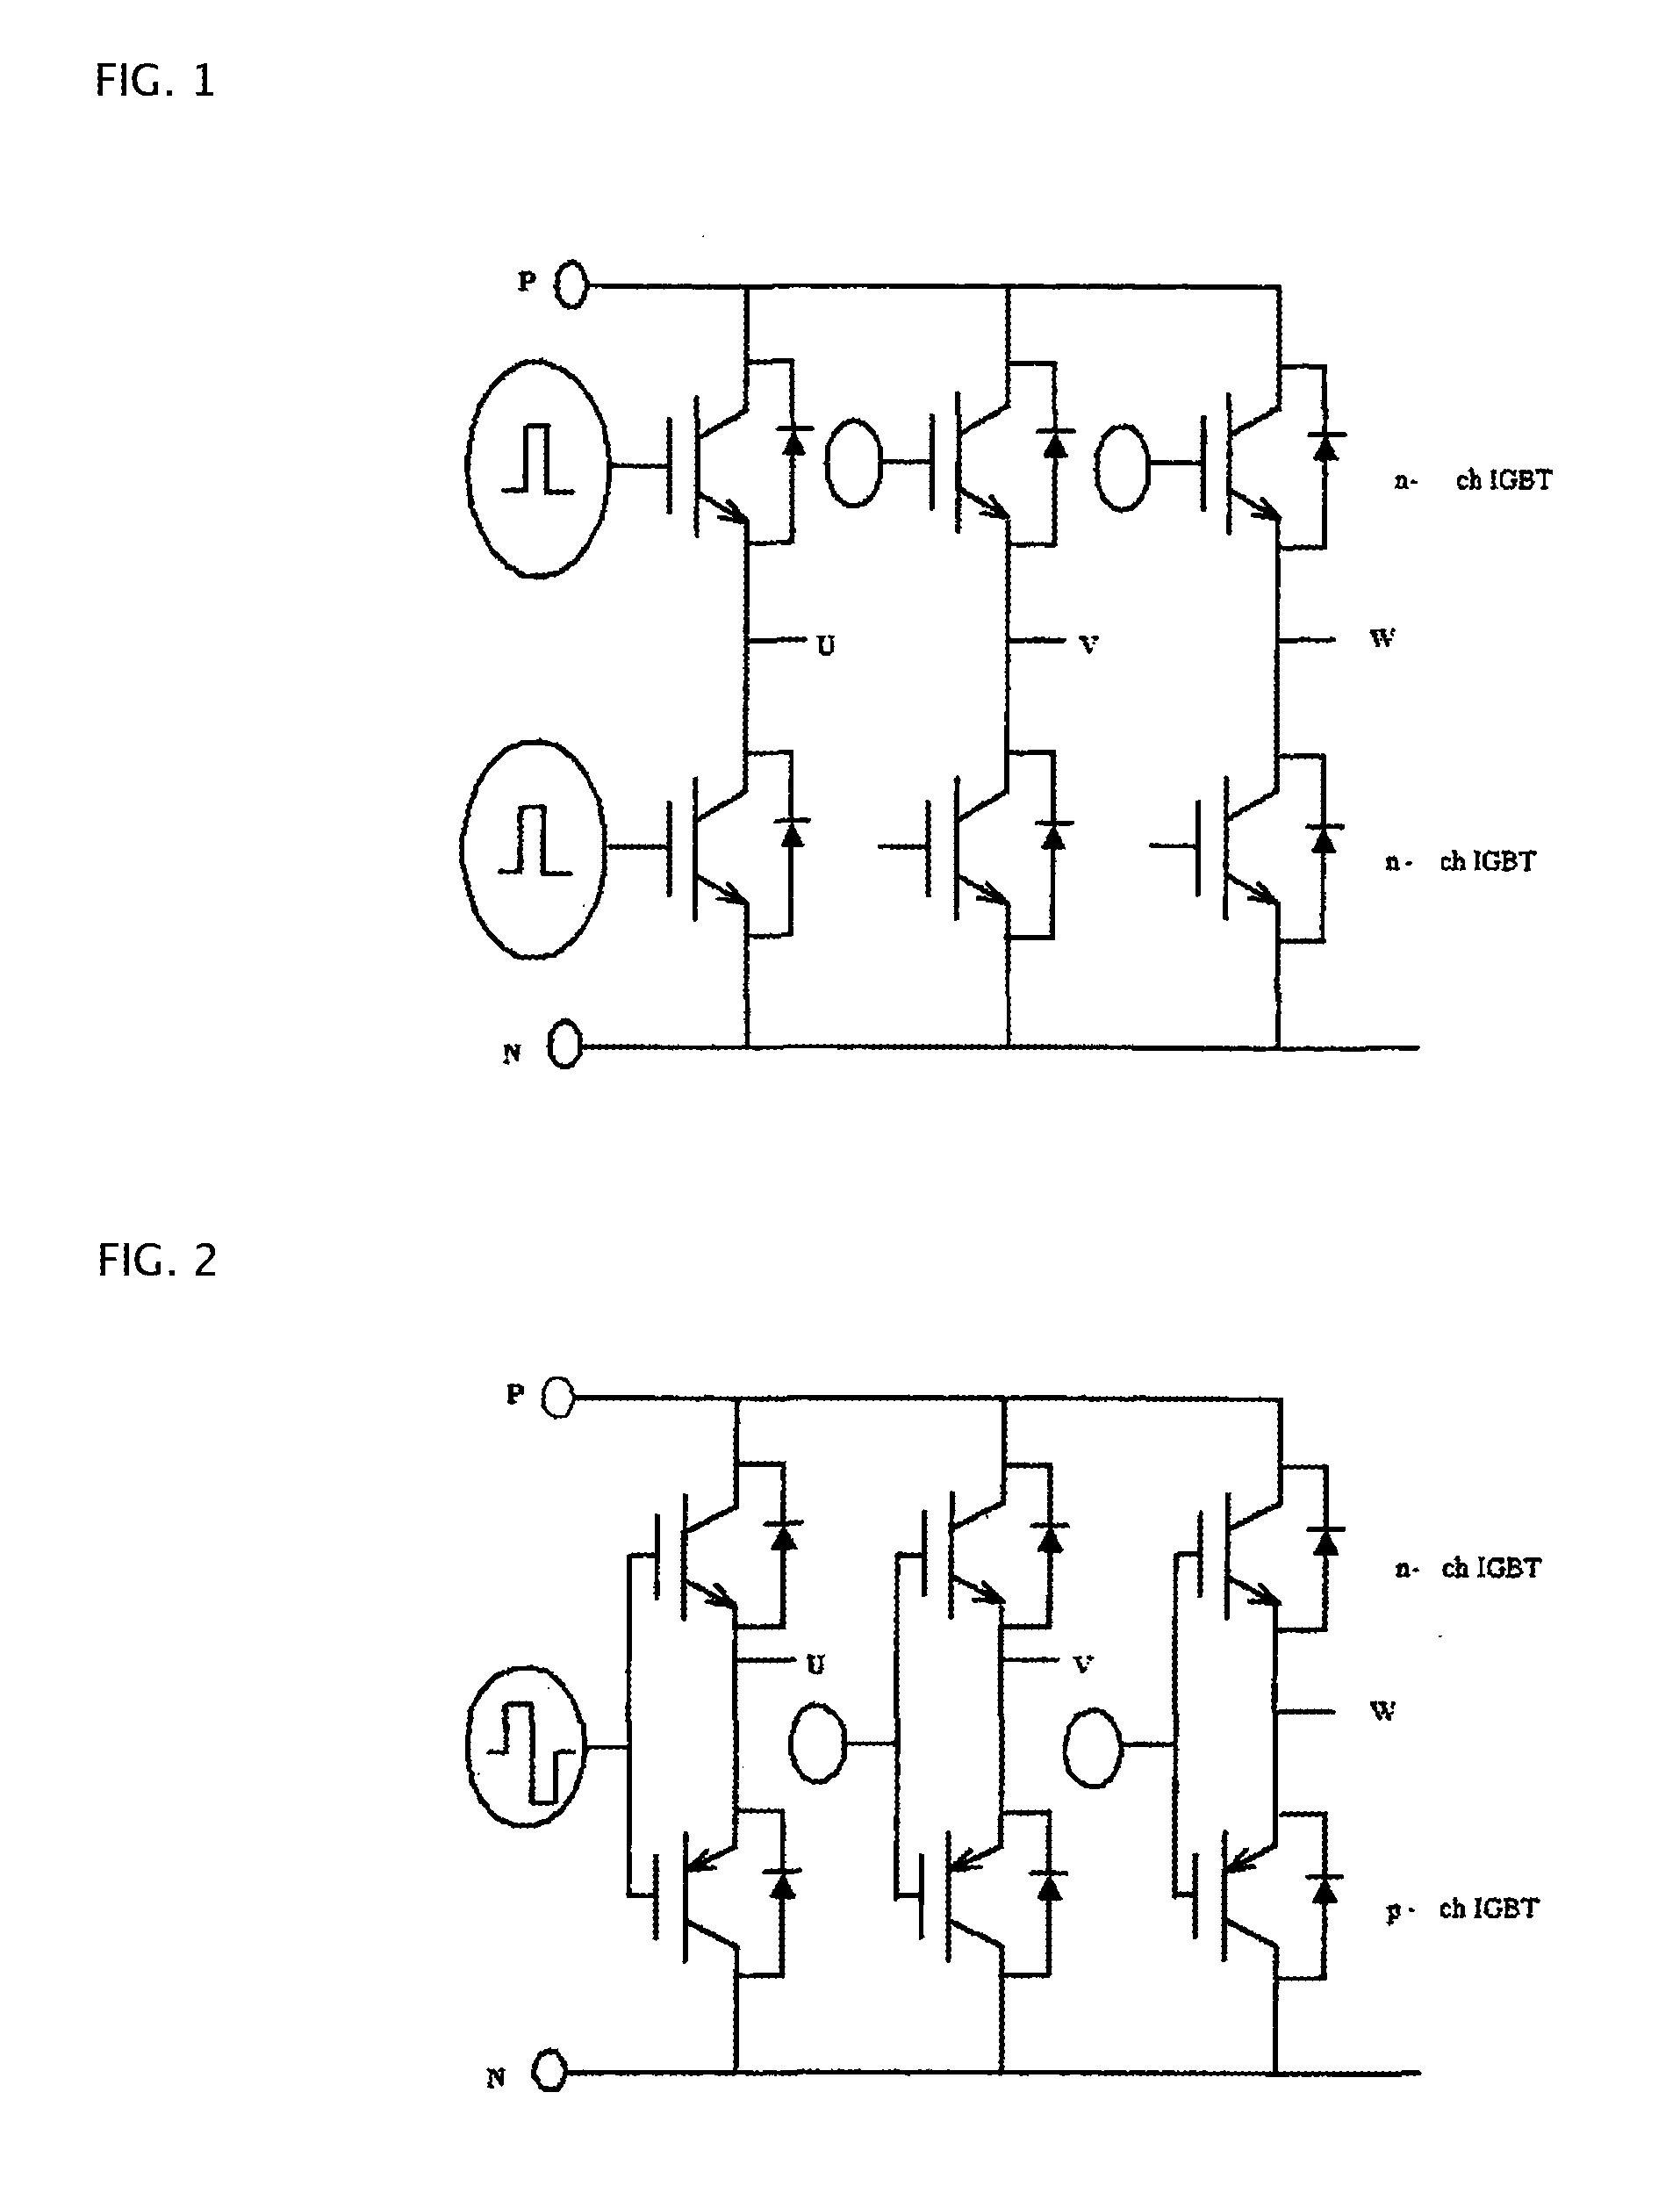 P-channel silicon carbide mosfet